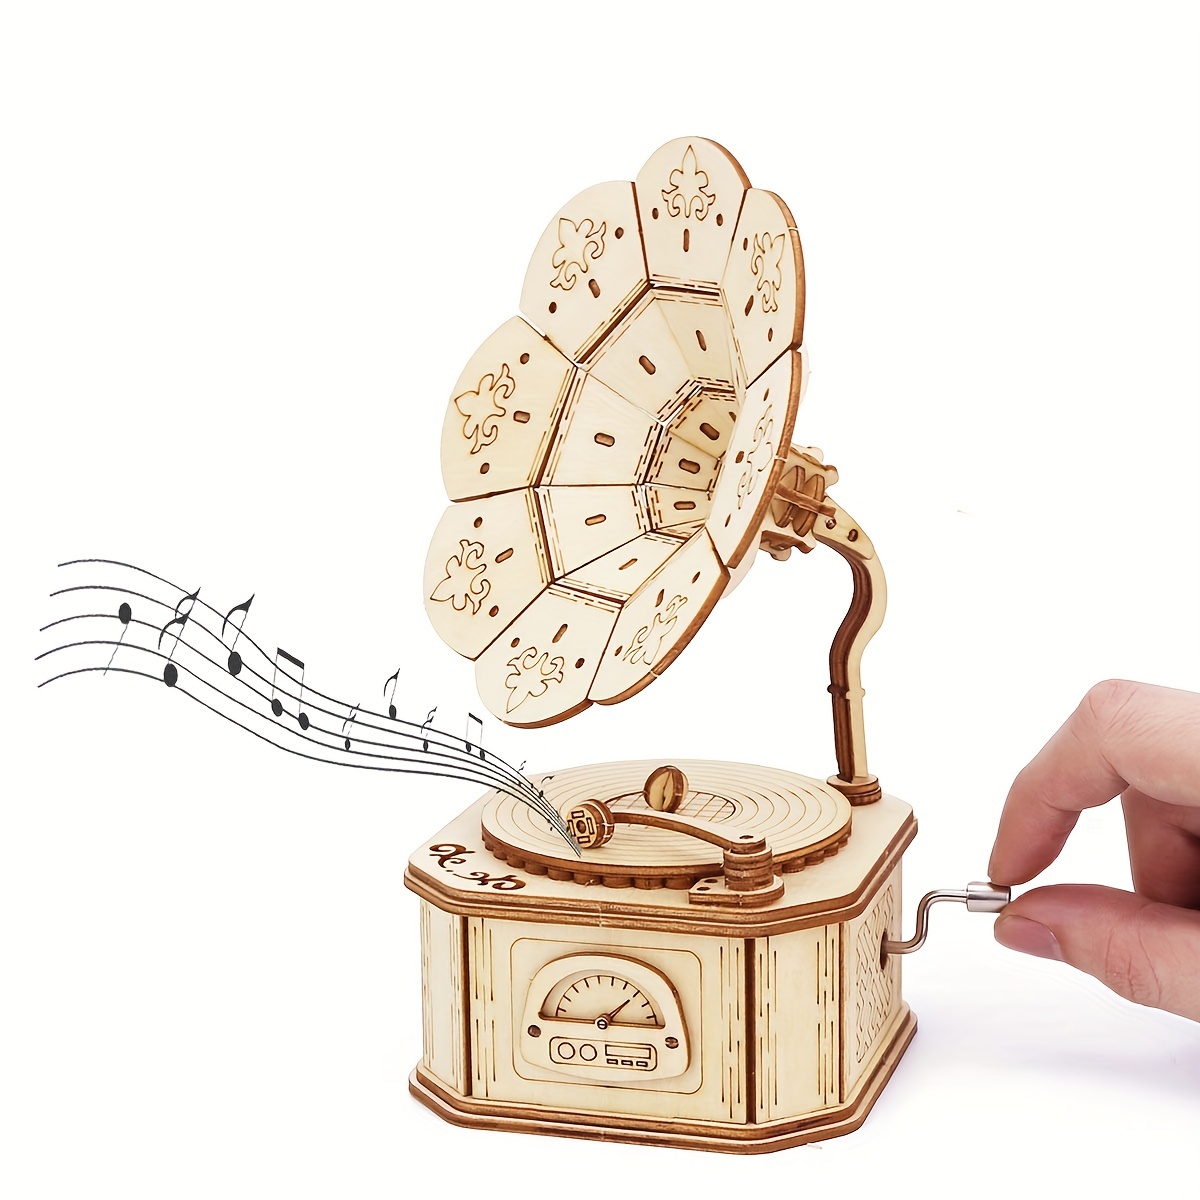 

3d Wooden , Gramophone Music Box 3d Three-dimensional Wooden Handmade Toy Tabletop Decoration Holiday Gift Wooden Crafts, Child Youth Birthday/christmas Gift